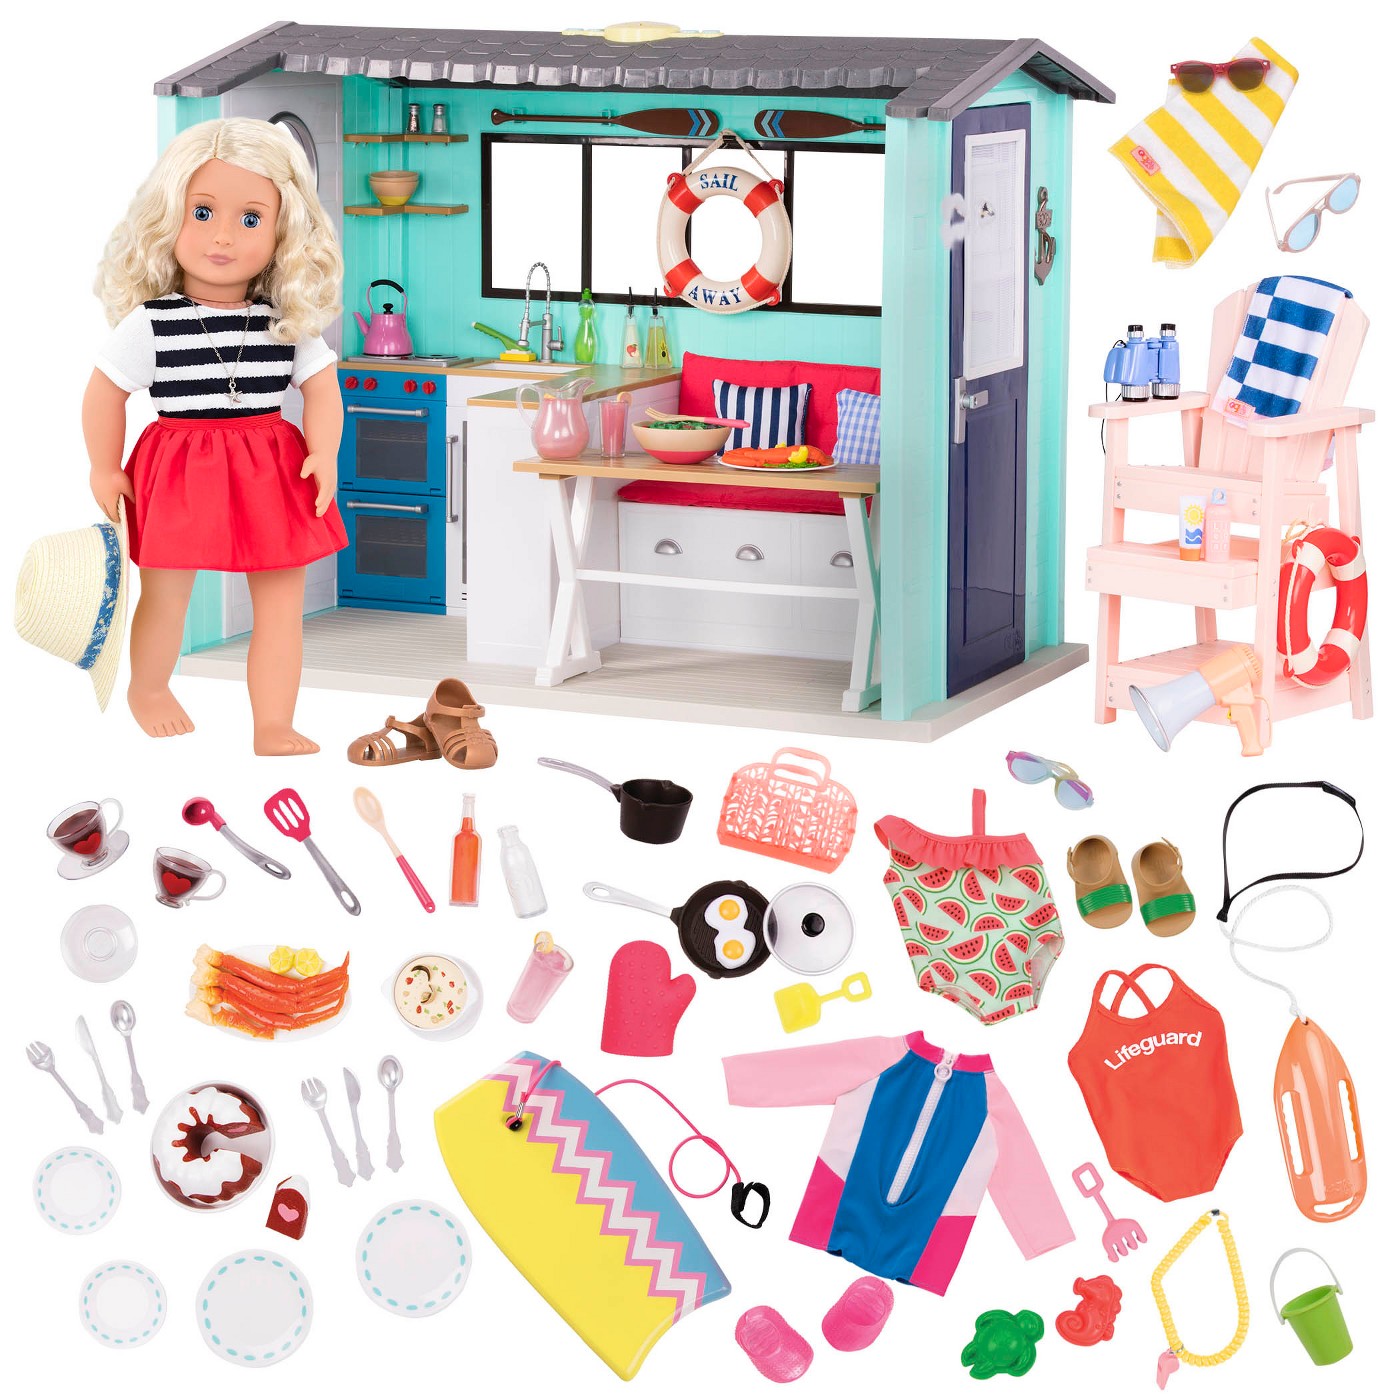 Our Generation Deluxe Beach House Set with Clarissa Doll - image 1 of 8